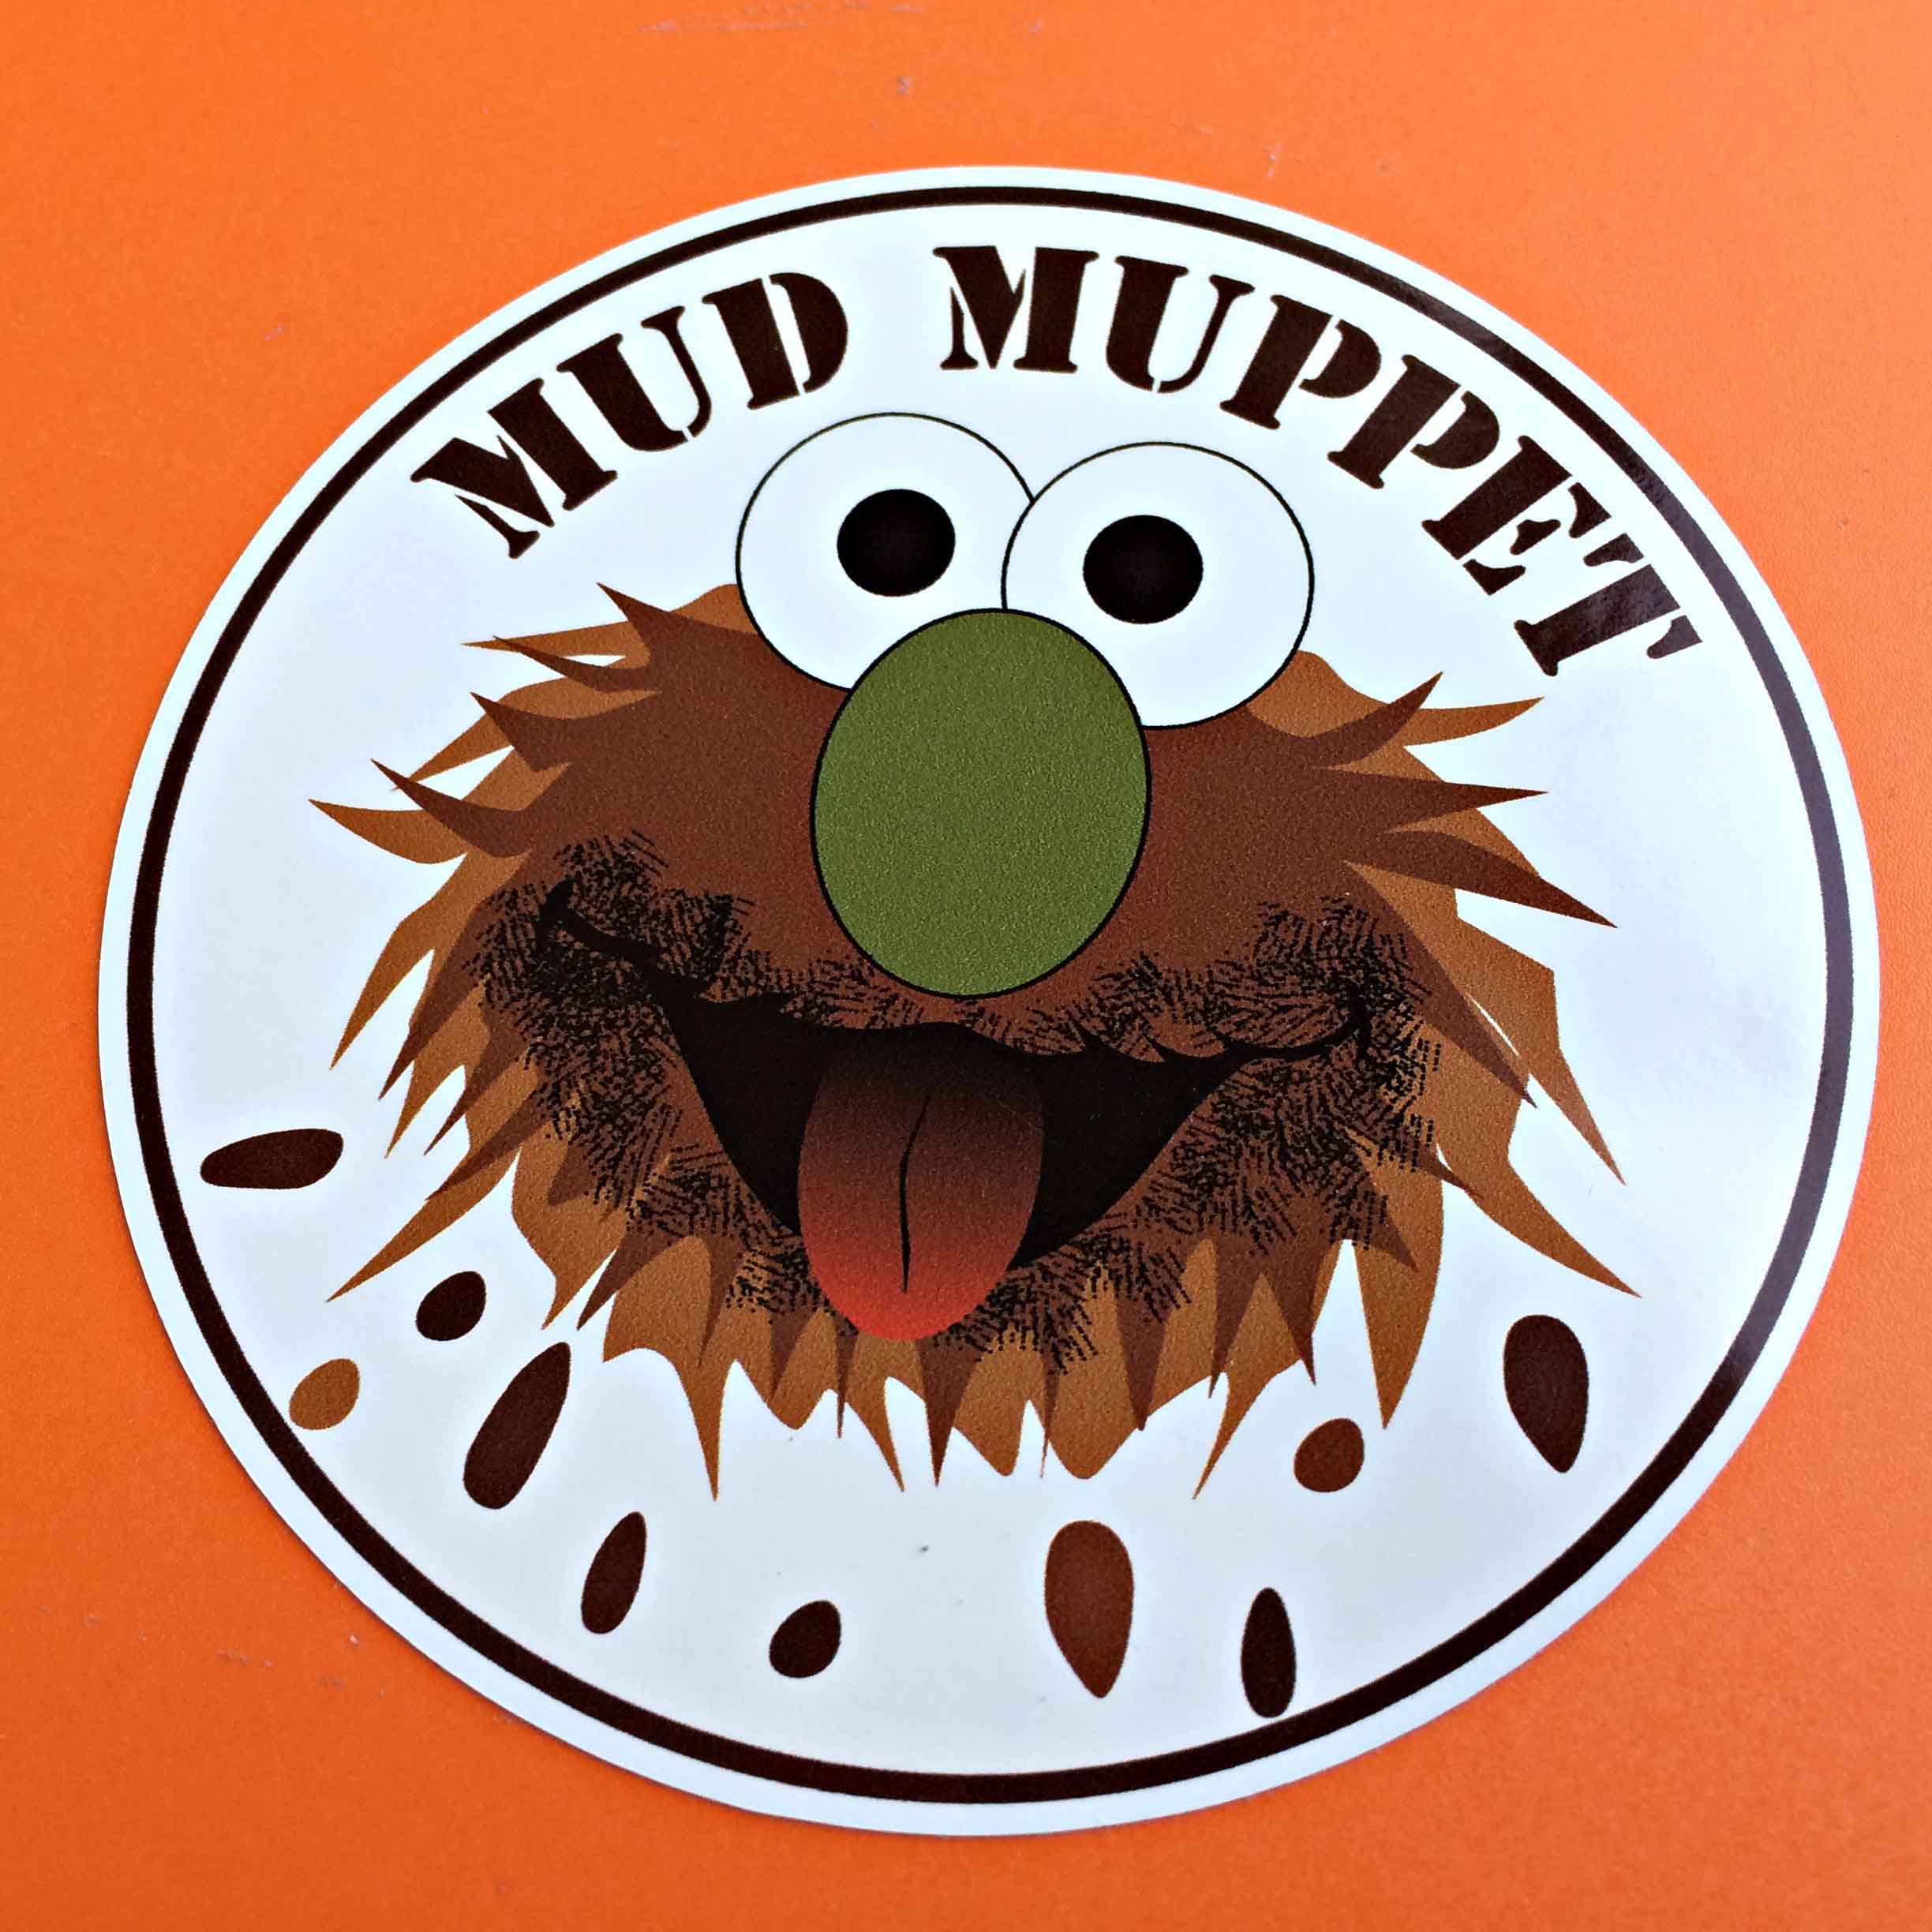 MUD MUPPET OFF ROAD STICKER. Mud Muppet in black lettering. A Muppet character with brown fur, a green nose, a red tongue and black and white eyes. Below are brown mud splatters.